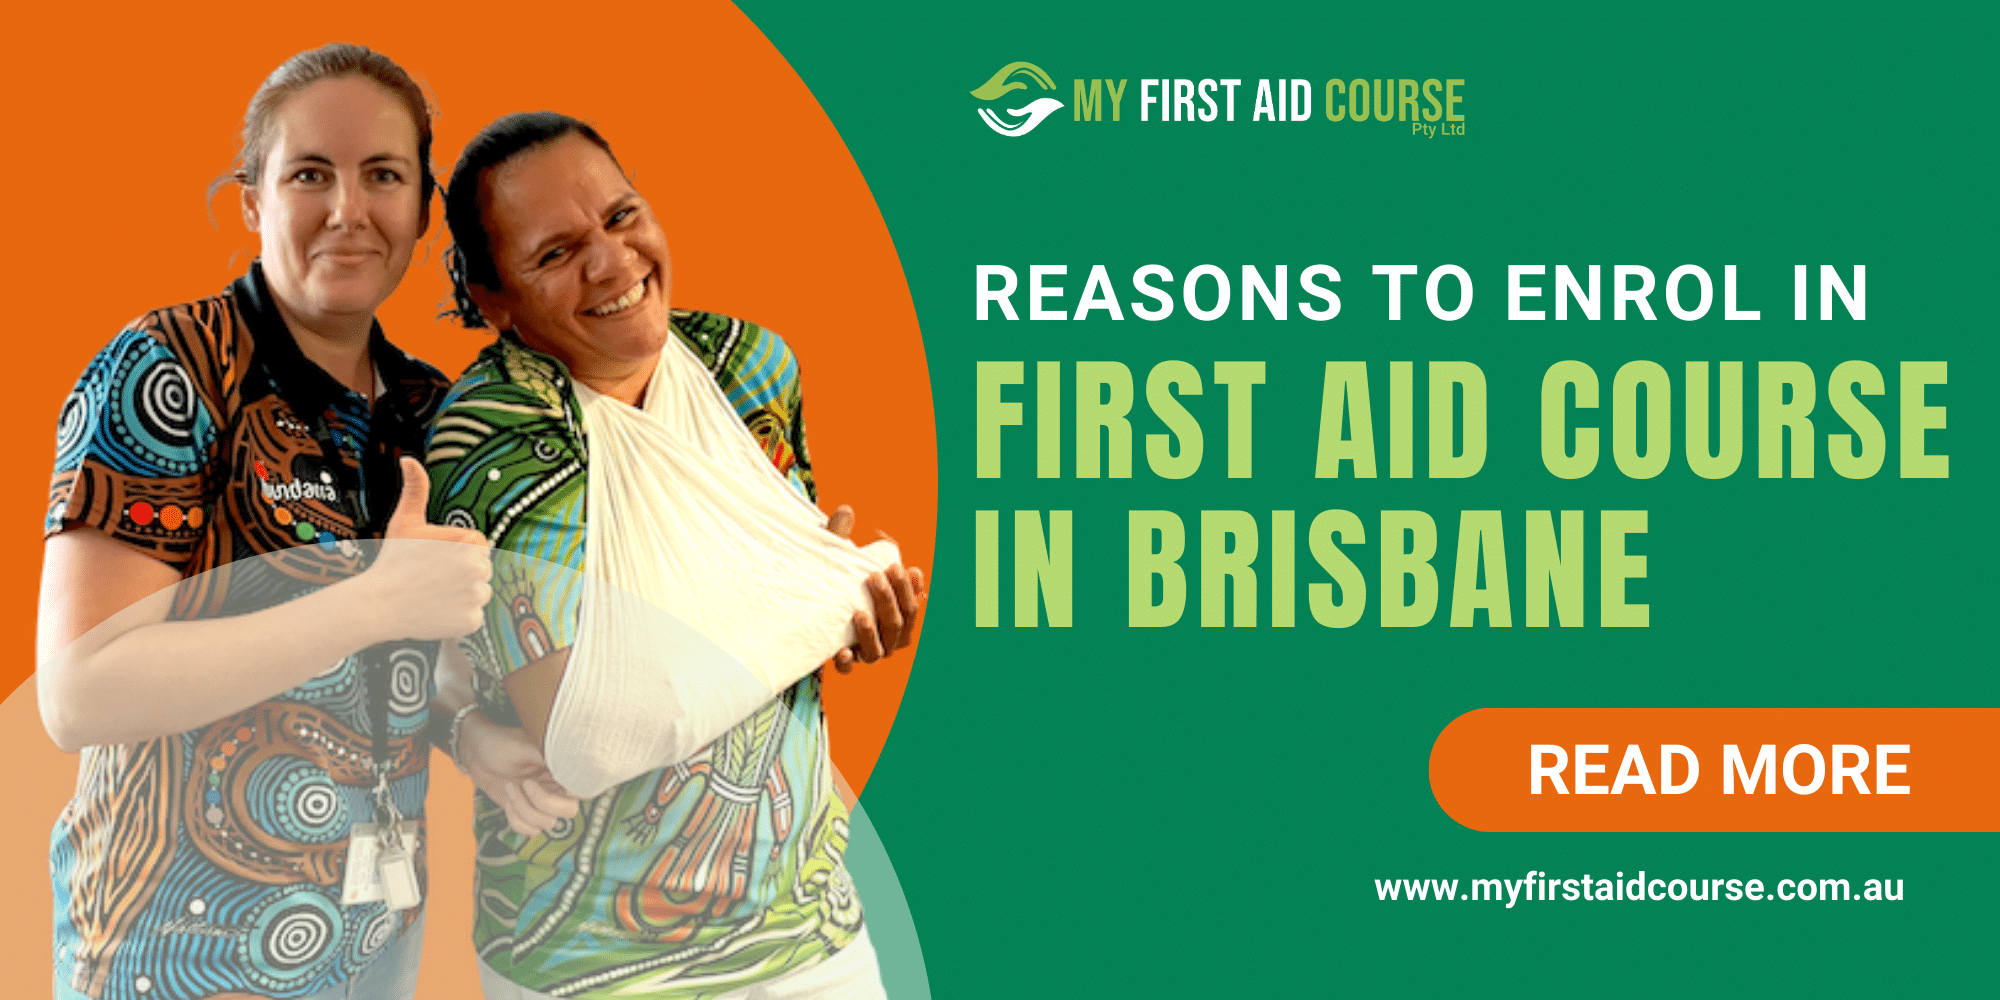 You are currently viewing Reasons to Enrol in First Aid Course in Brisbane